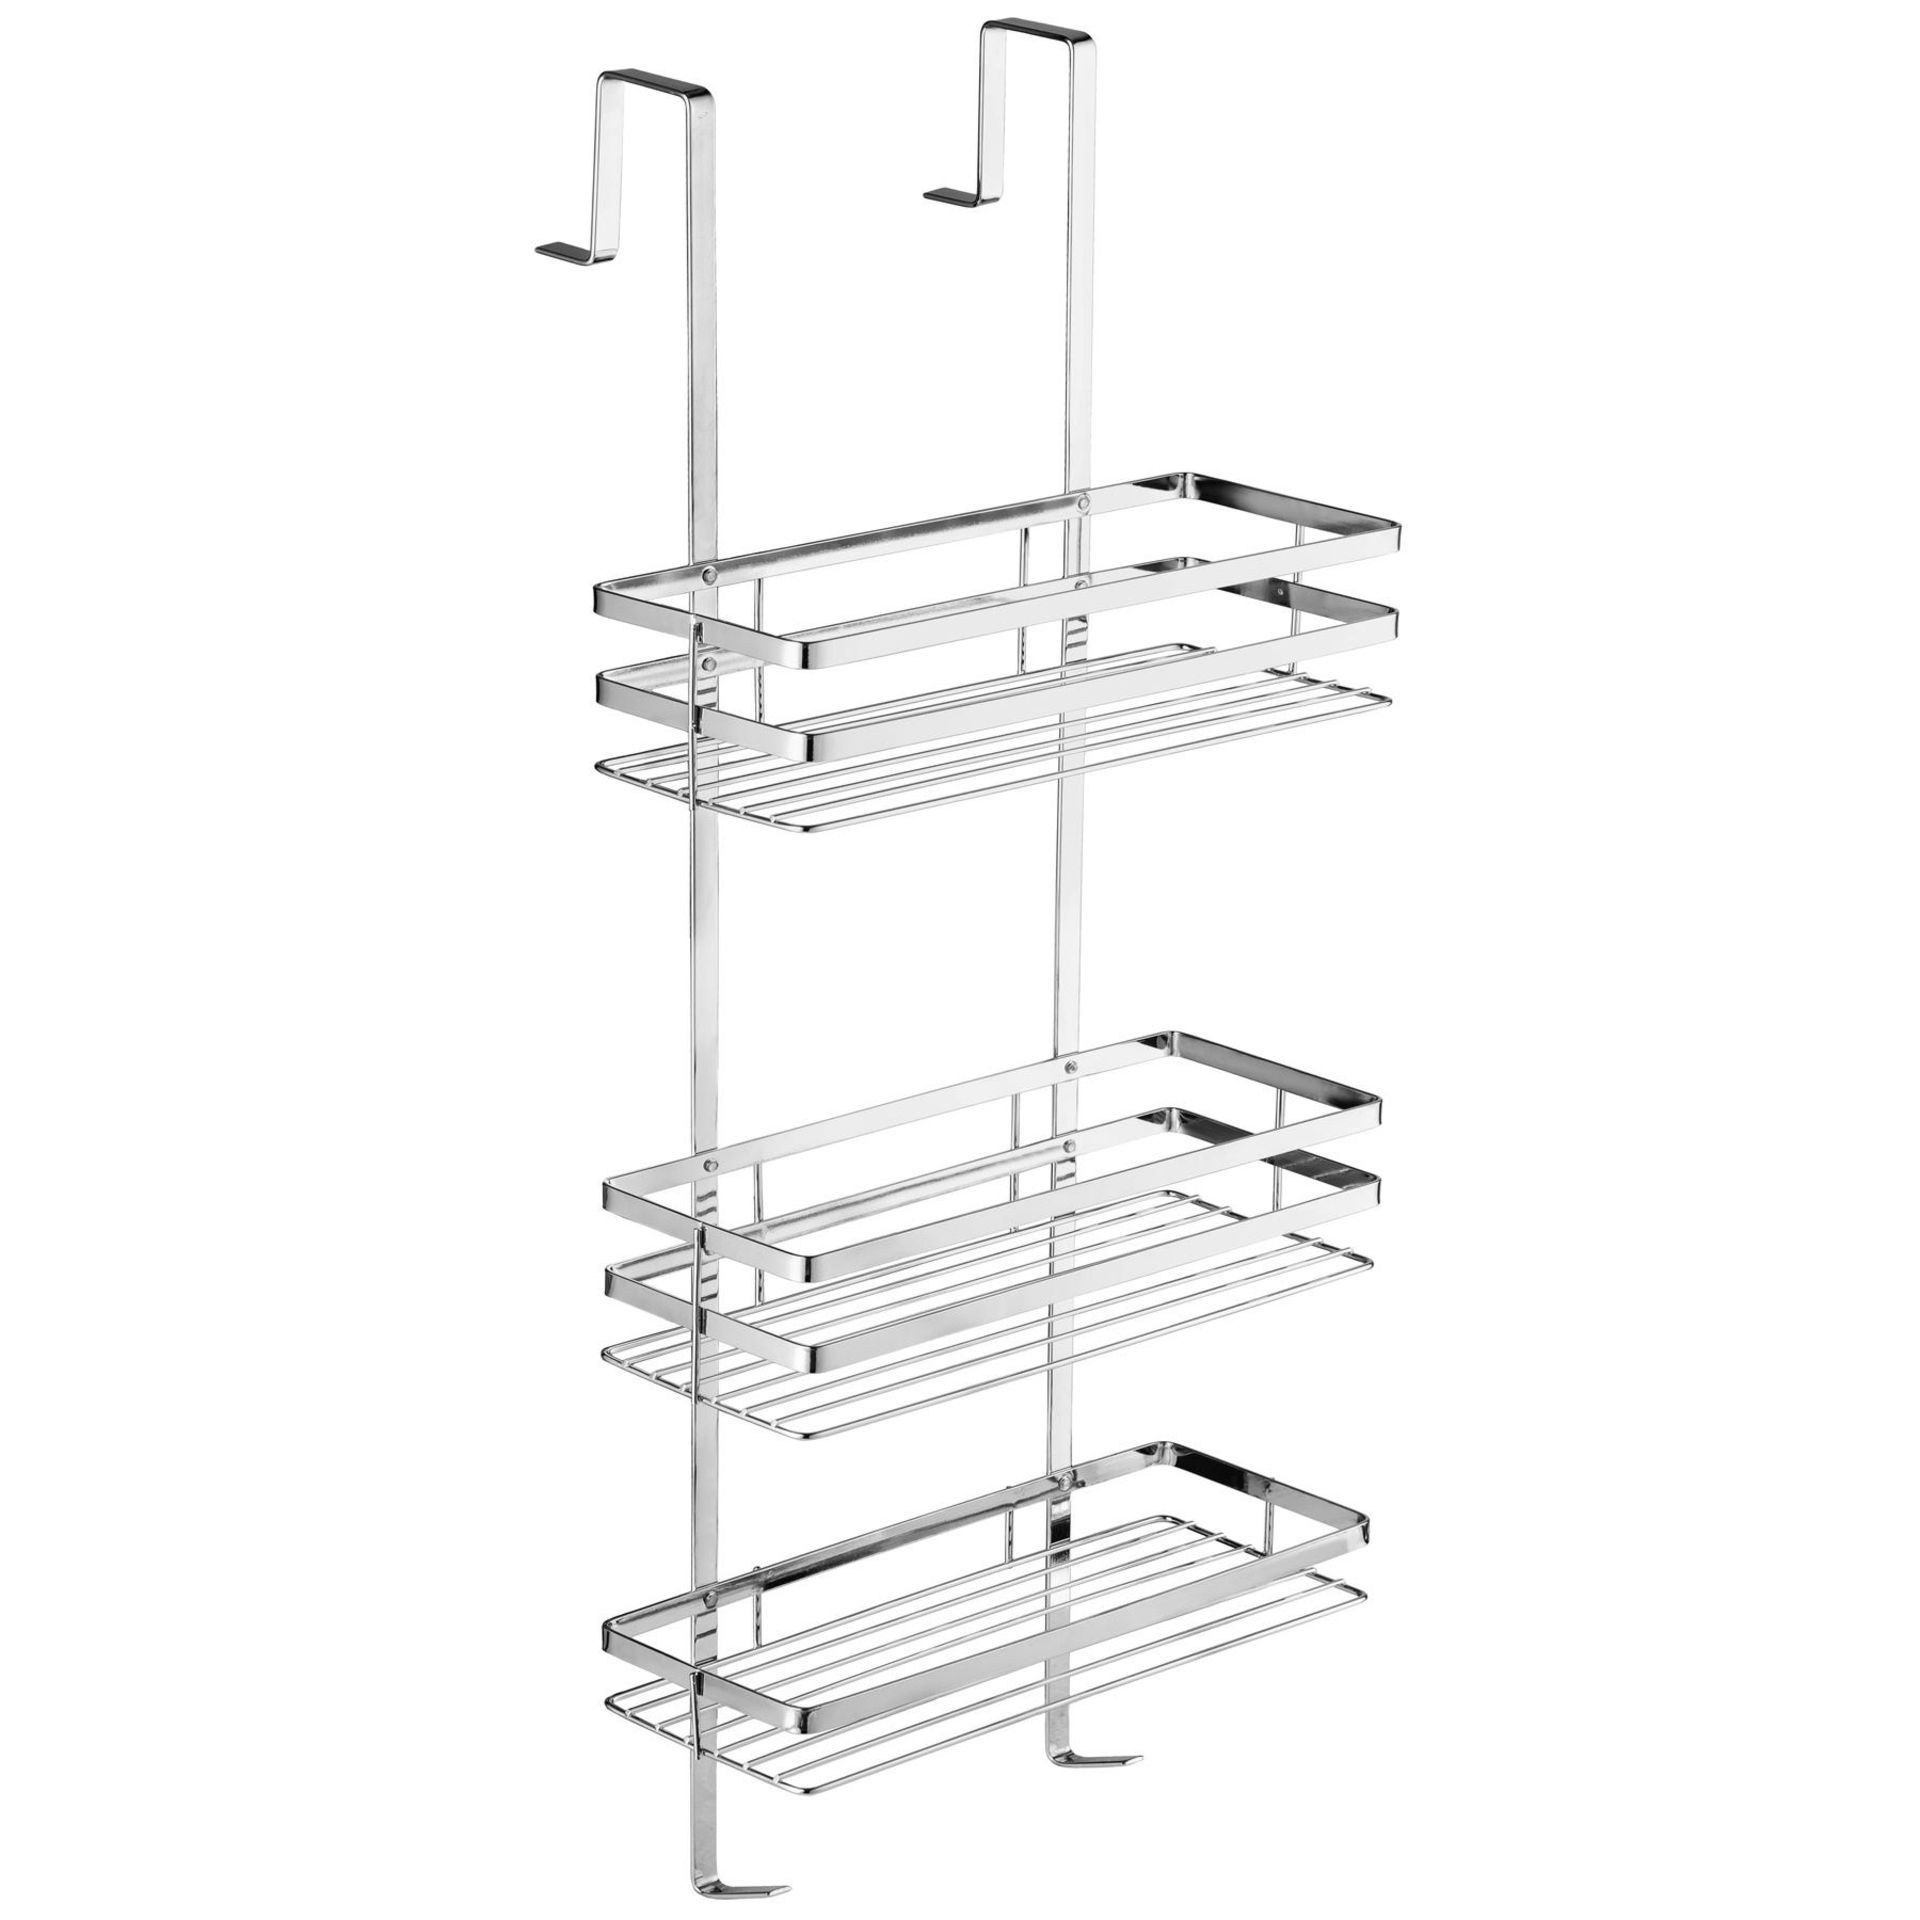 Tectake - Shower Caddy Stainless Steel Silver - Boxed. RRP £66.99 - Image 2 of 2